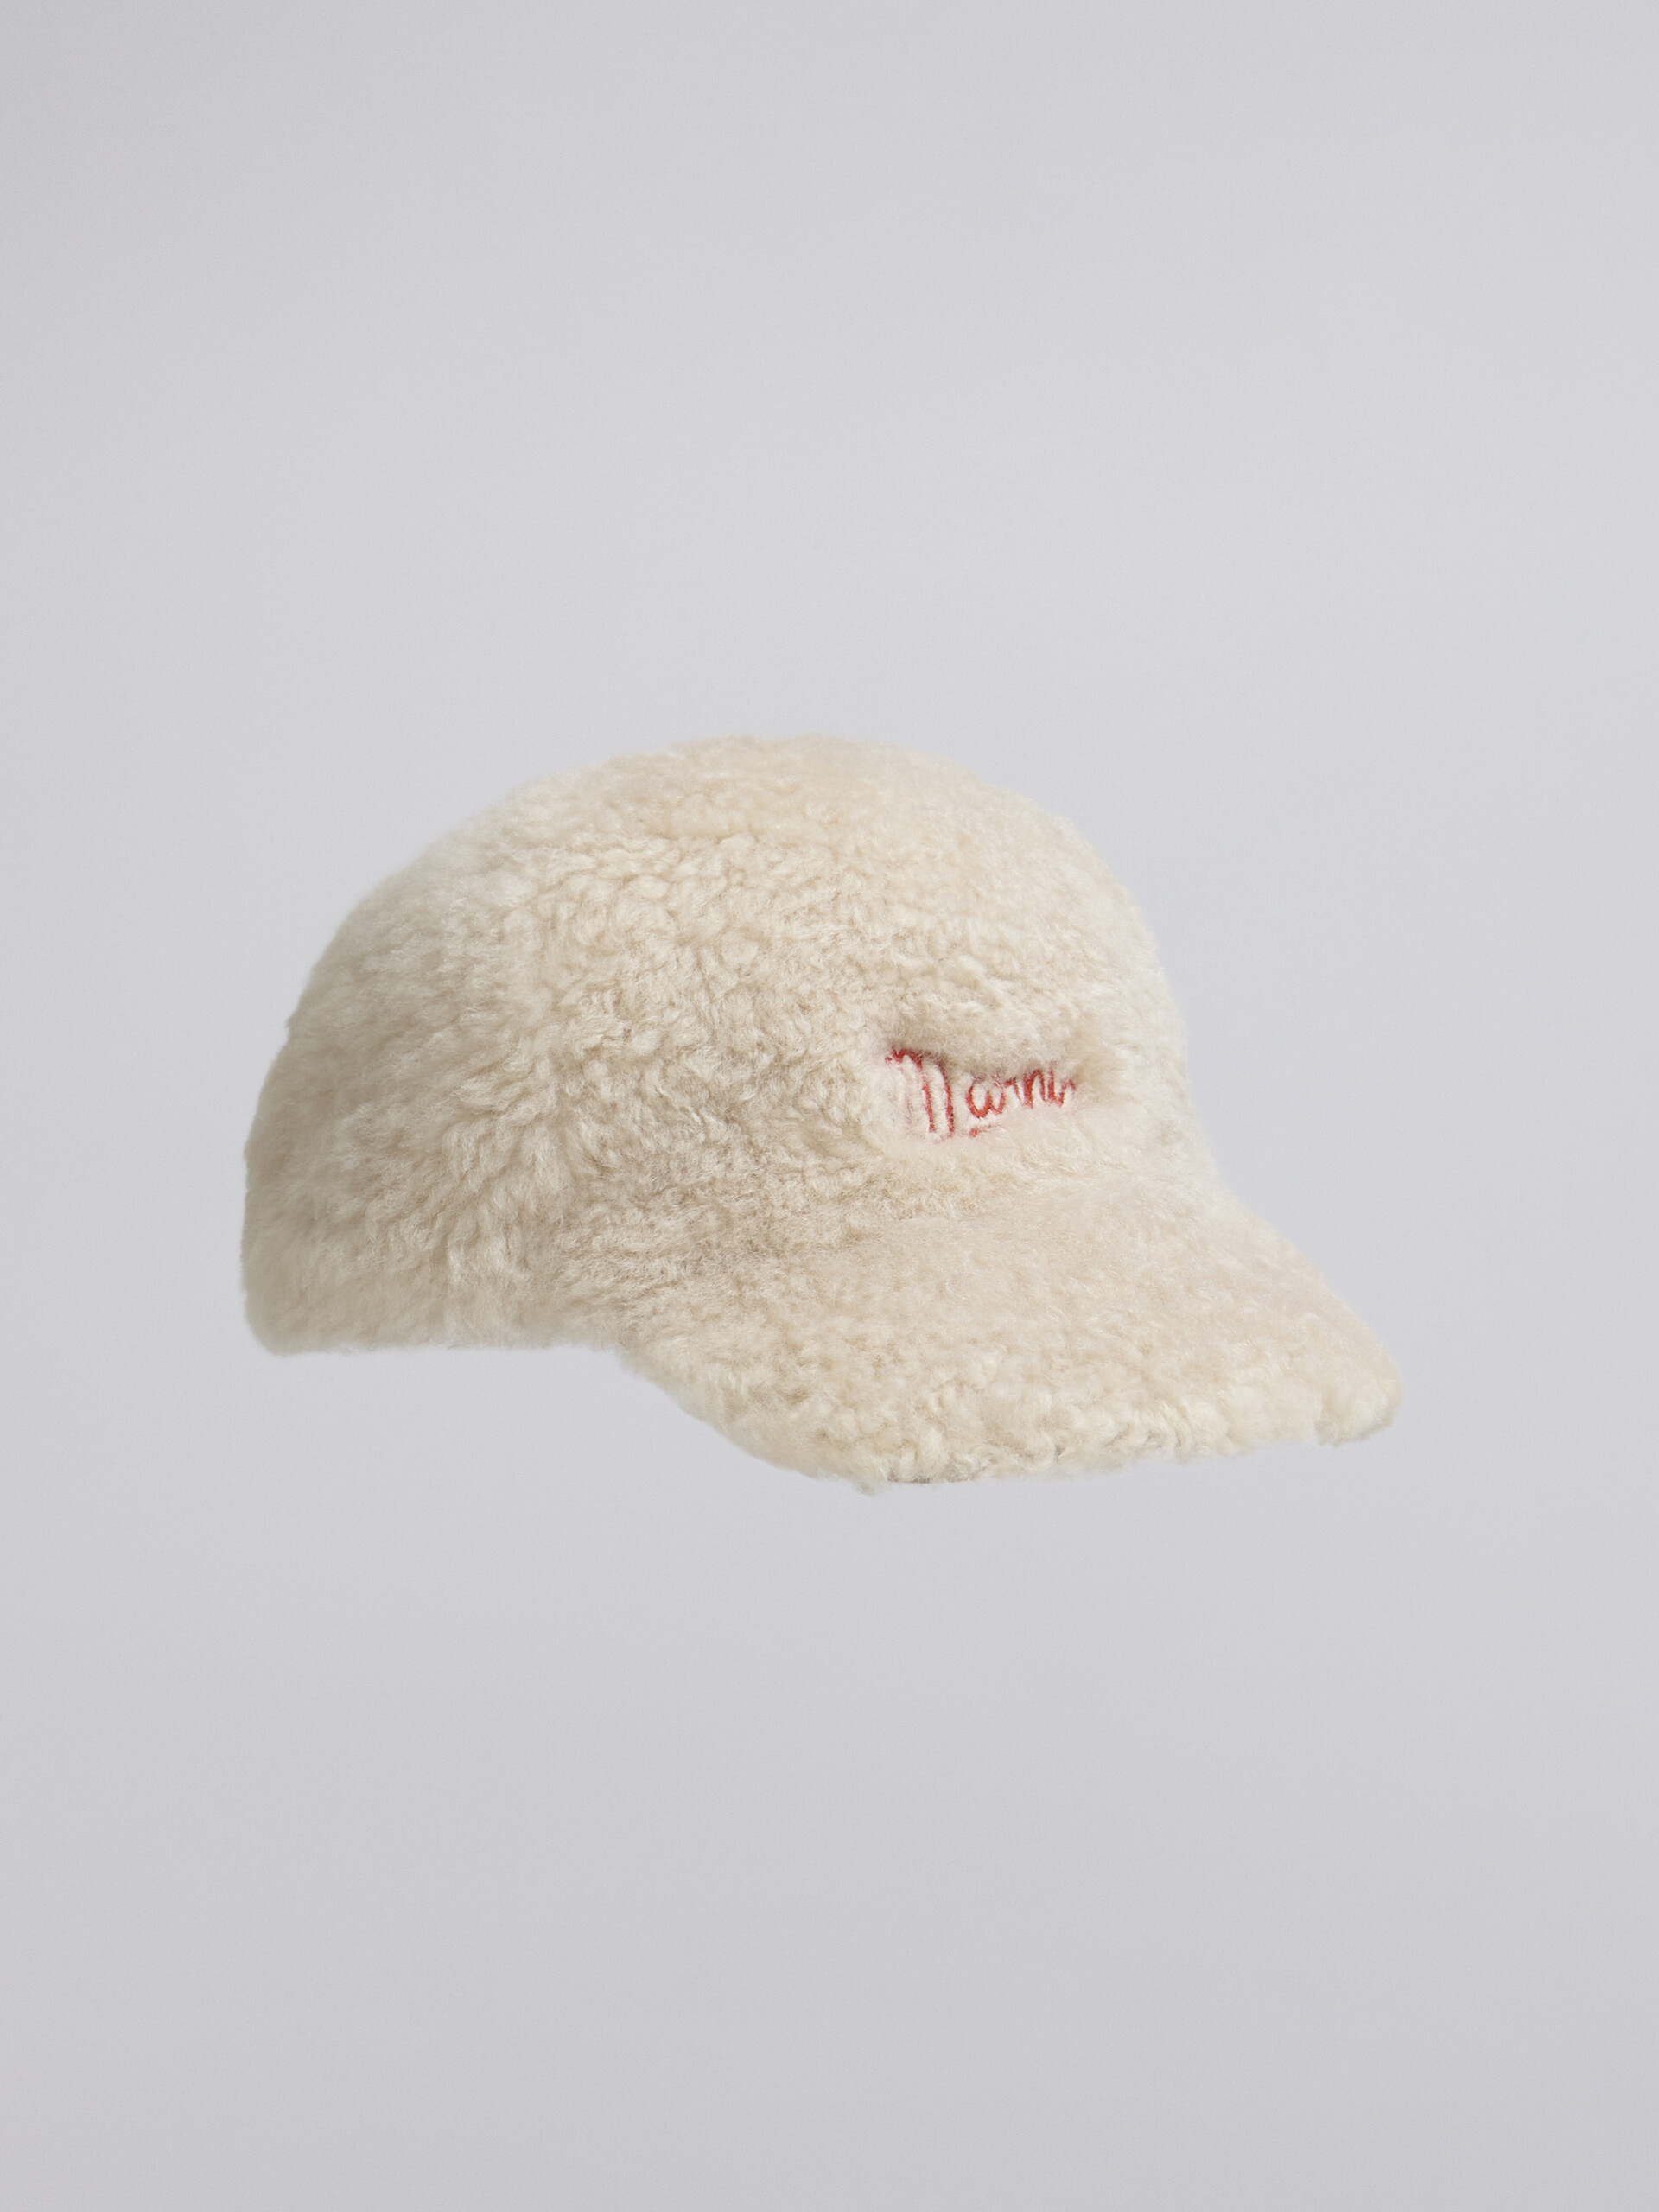 Shearling beanie with contrasting embroidered Marni logo - Hats - Image 1